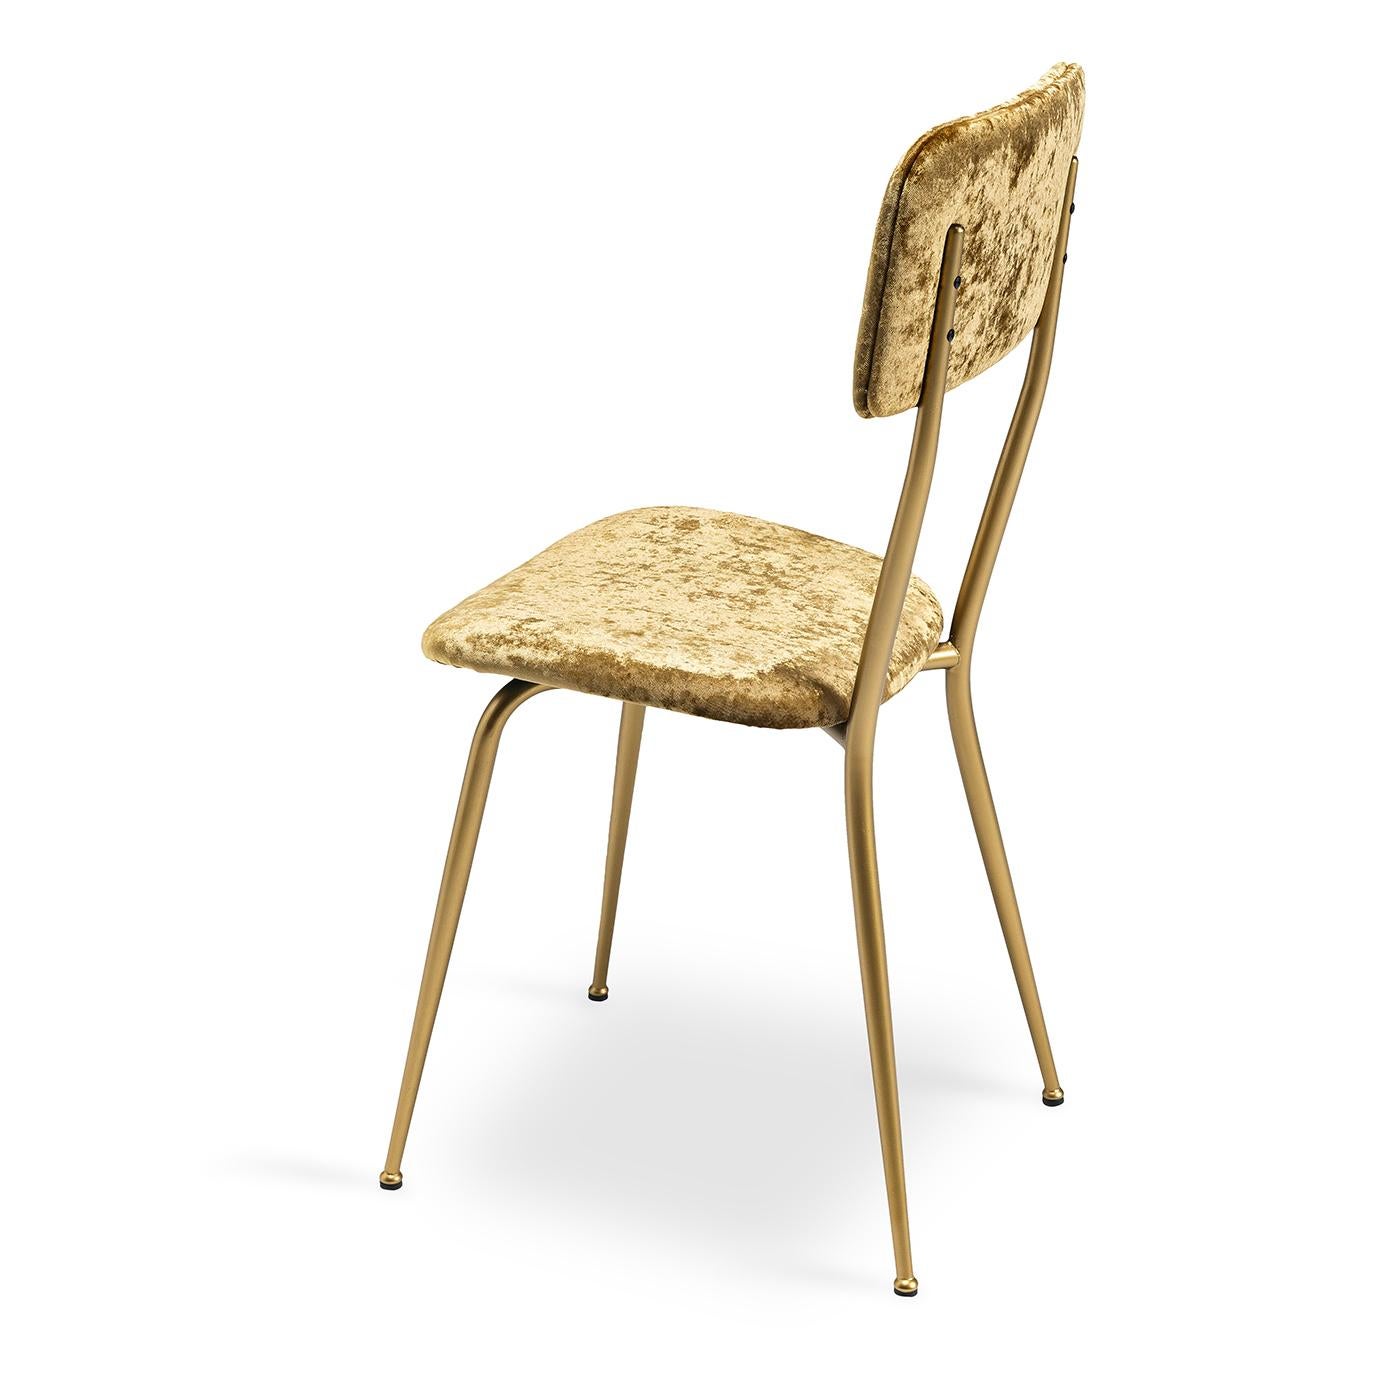 The Miss Ava 12 chair is distinguished a sleek silhouette, boasting clean lines and effortless proportions. Supported by a brushed brass metal frame, its padded seat and backrest are upholstered in luxurious rust-colored velvet fabric. With its